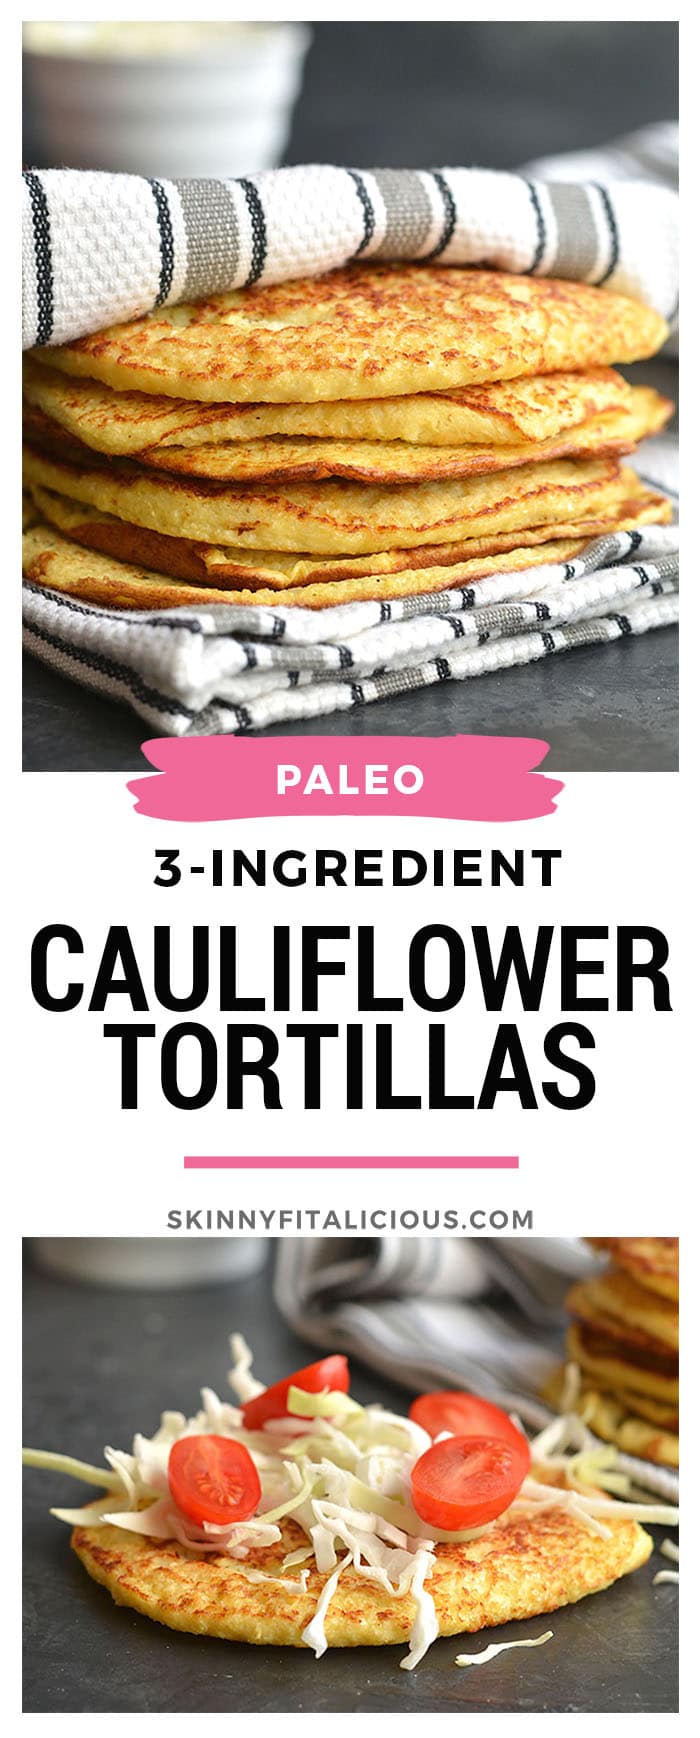 Homemade 3-ingredient Cauliflower Tortillas! Made with eggs, cauliflower and garlic, these grain-free tortillas are easy to make and customizable. They are perfect as a gluten free substitute for wraps and tortillas. They also double as breakfast fritters. Gluten Free + Paleo + Low Carb + Low Calorie